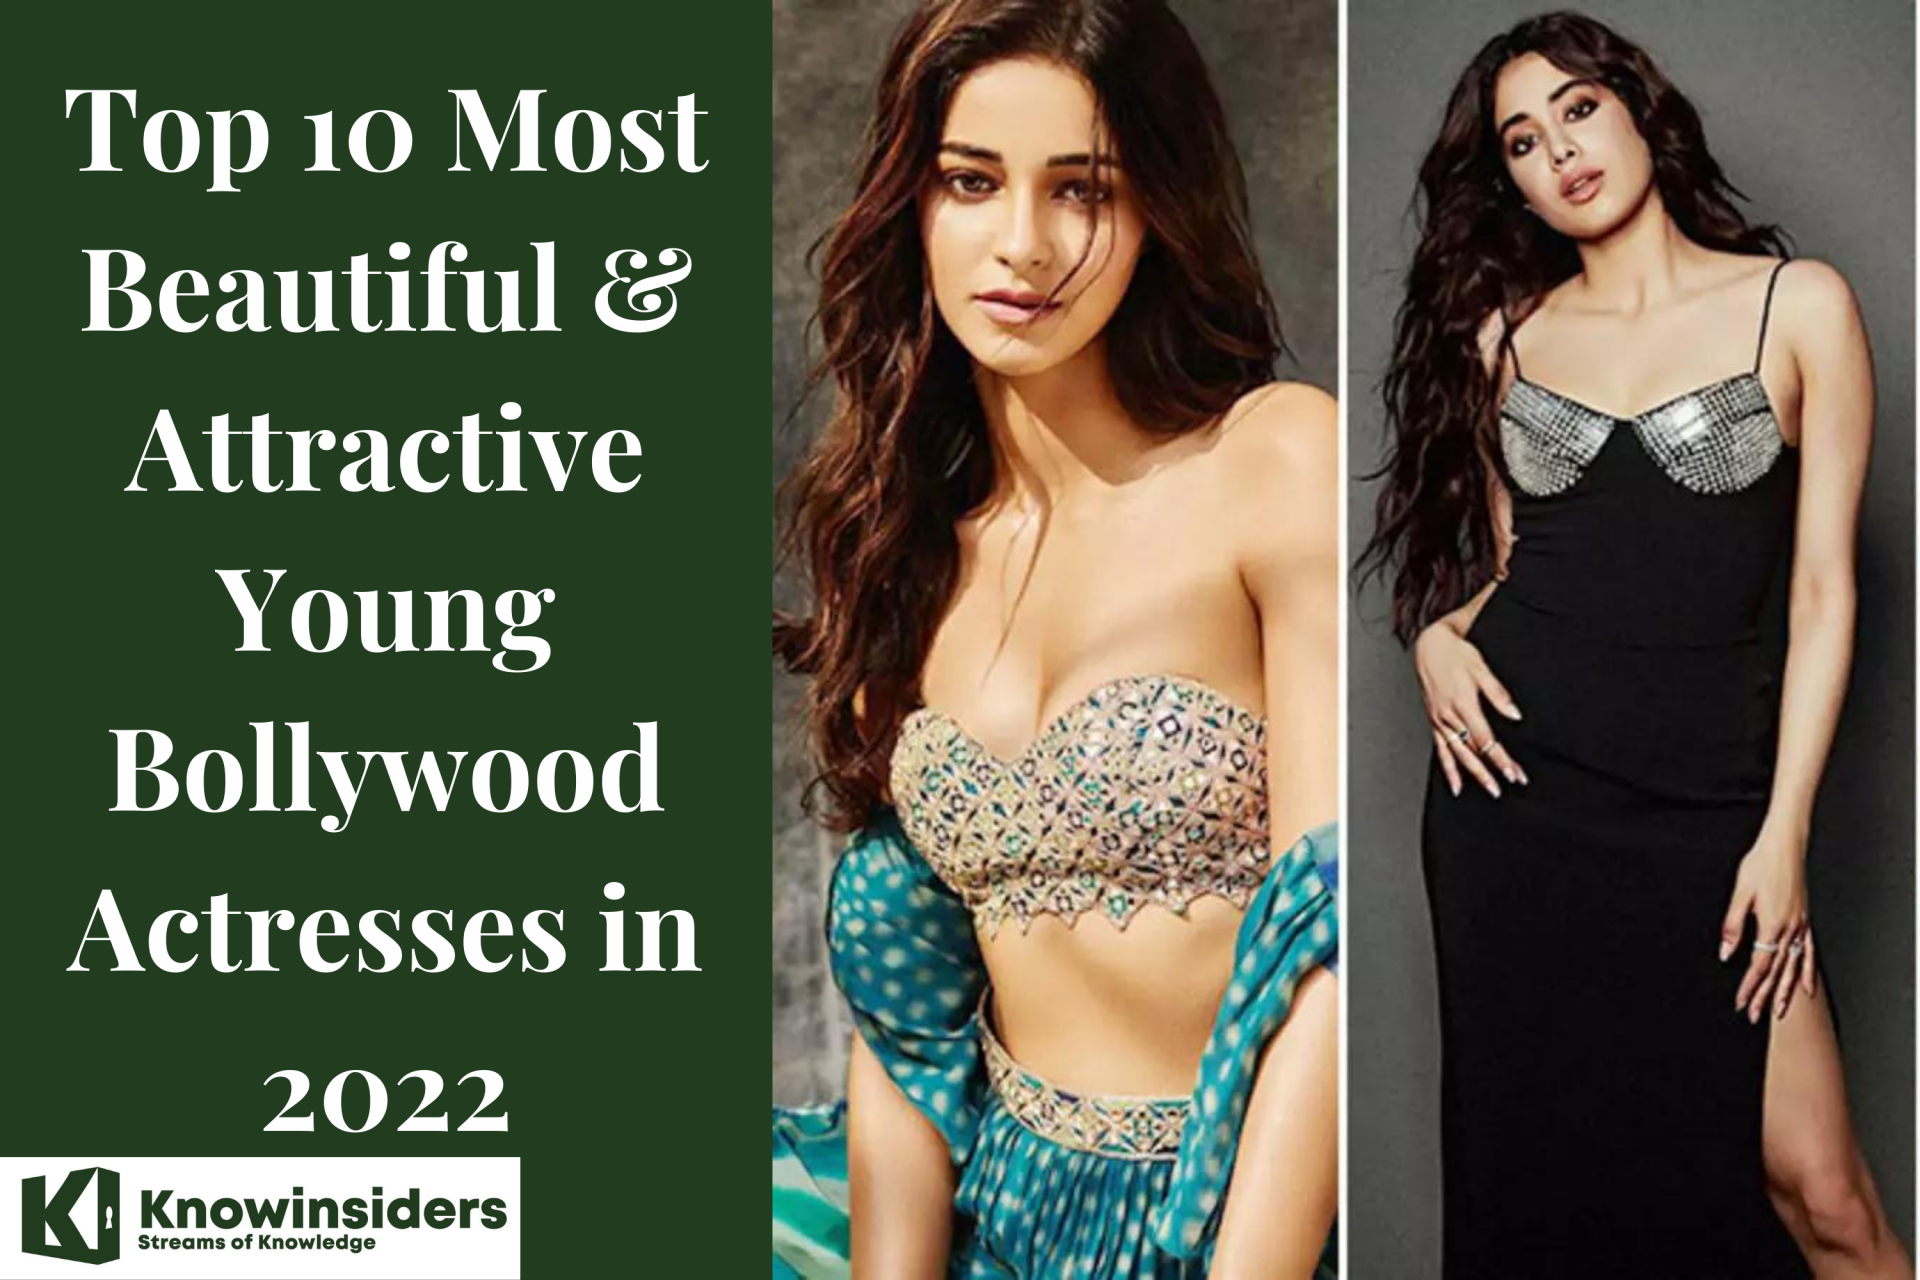 Top 10 Most Beautiful & Attractive Young Bollywood Actresses in 2022